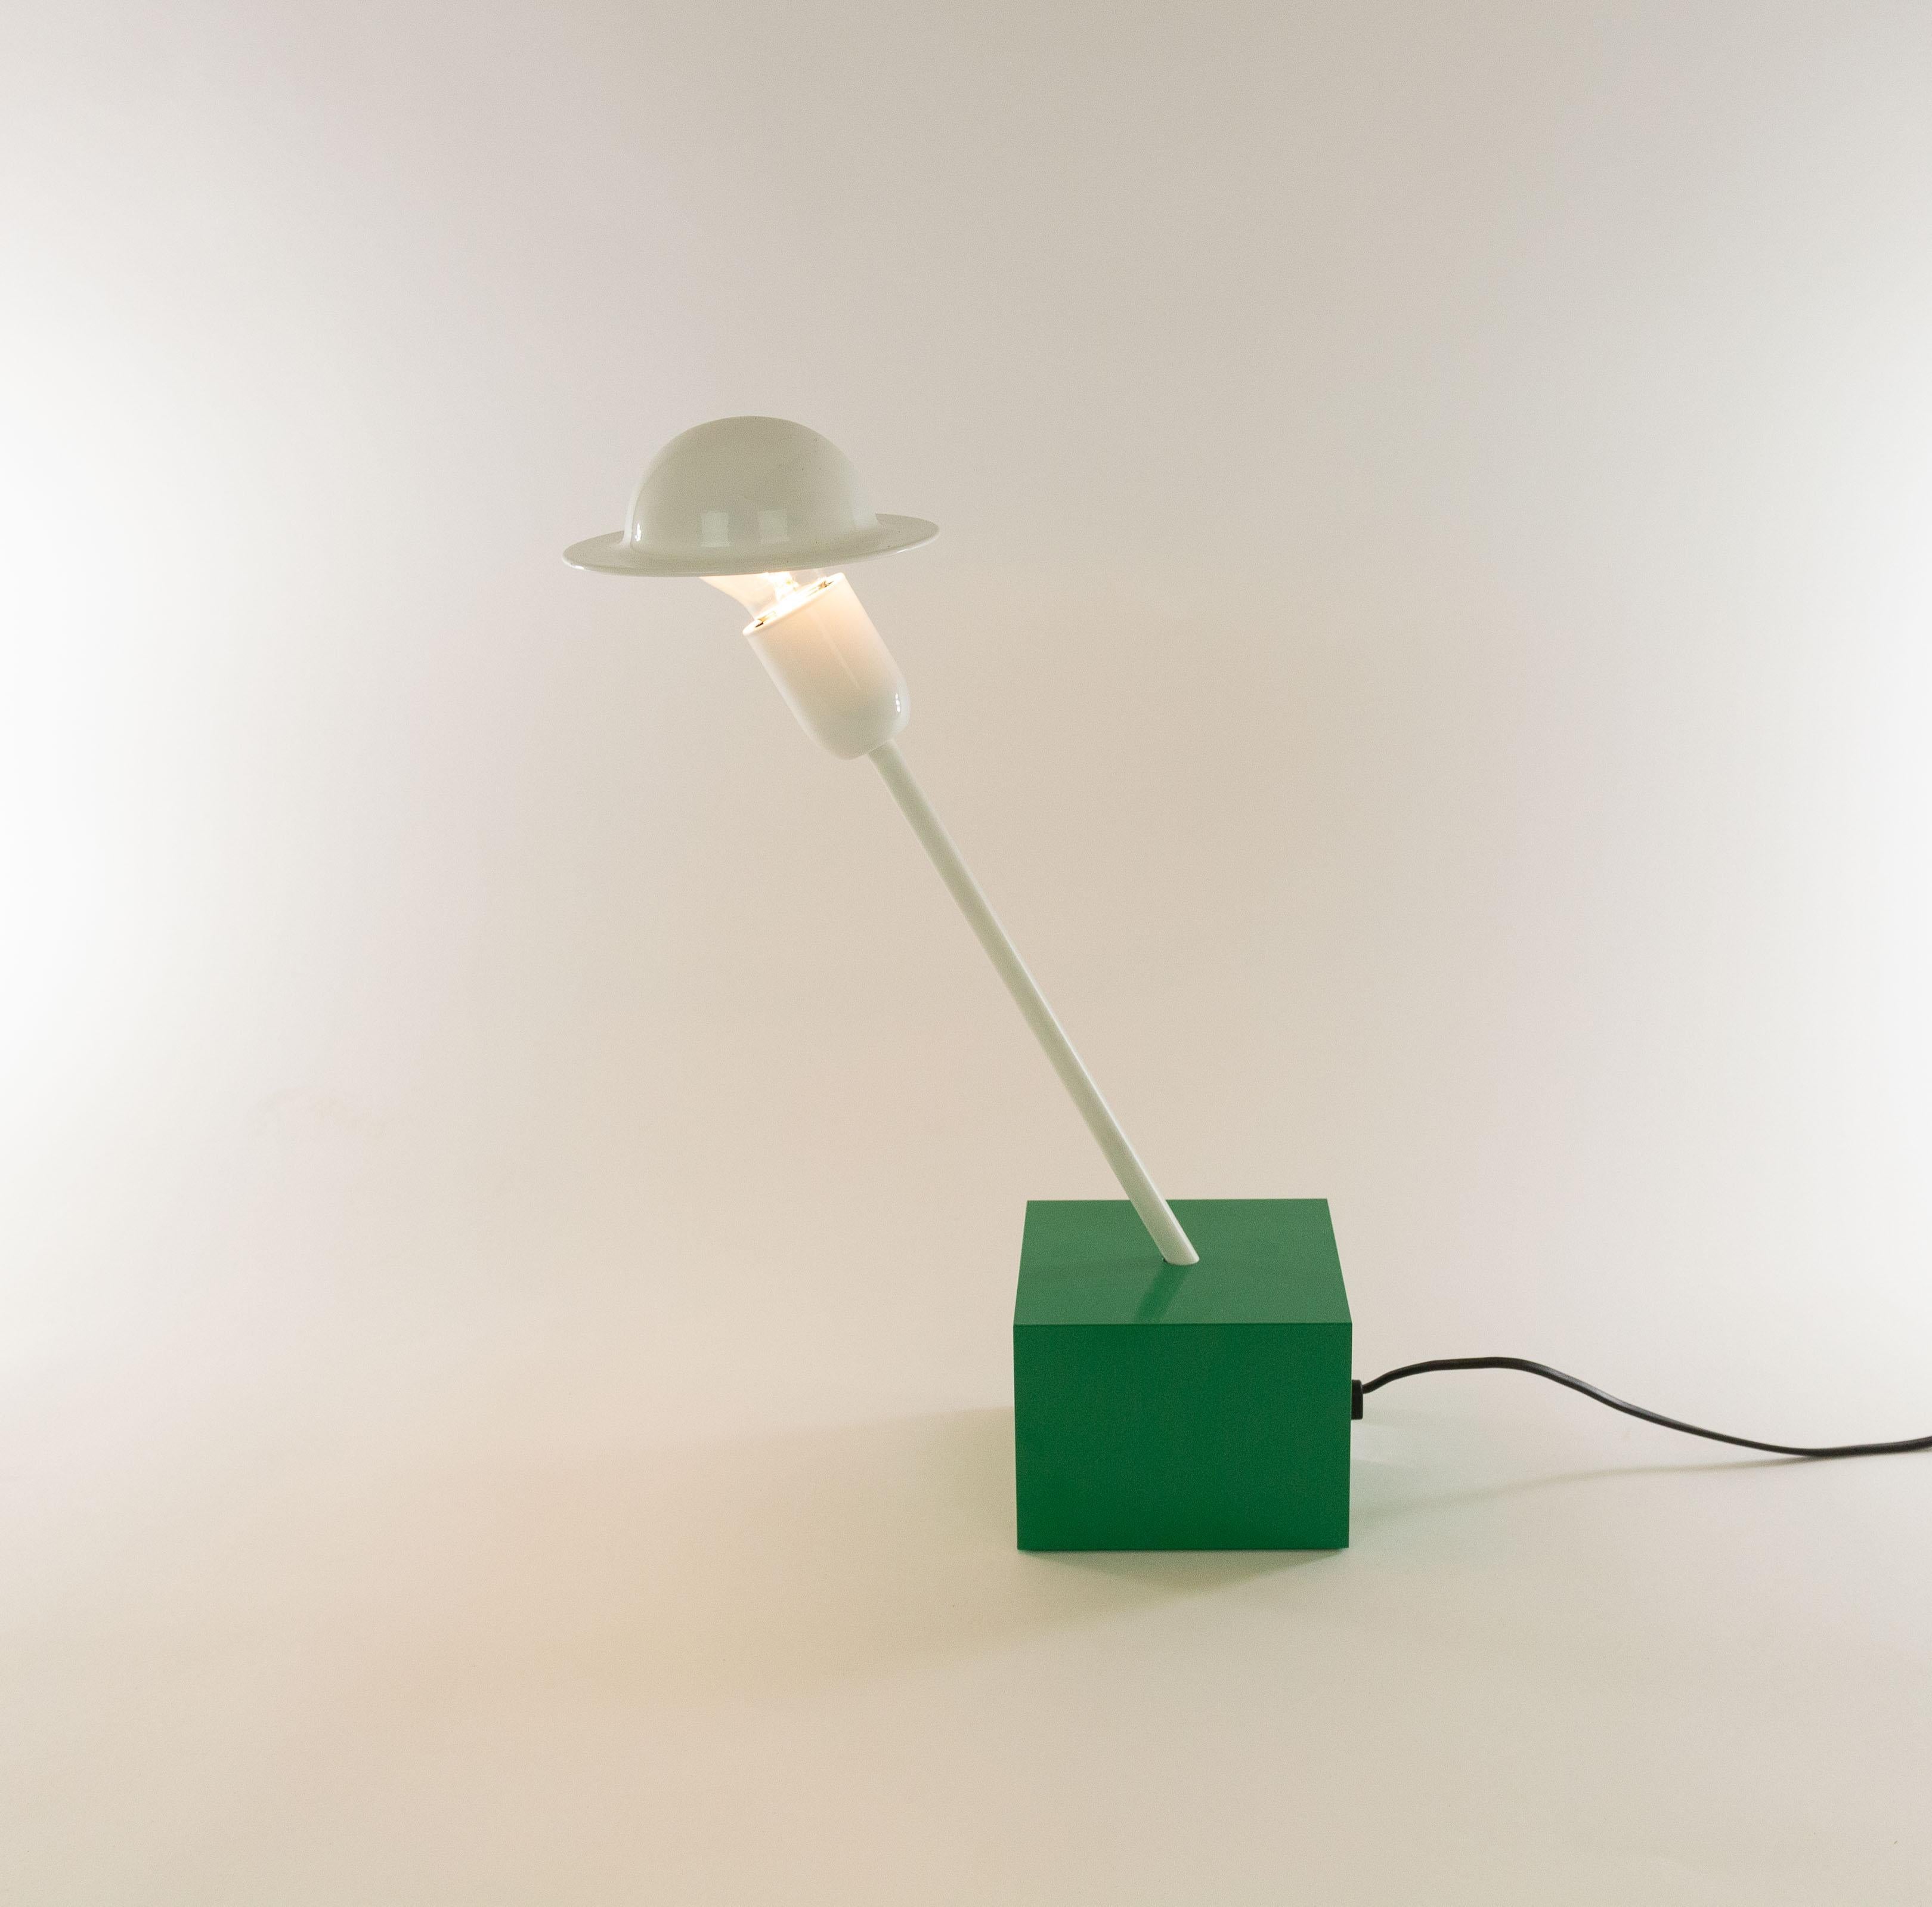 Don table lamp designed in 1977 by Ettore Sottsass and manufactured by Stilnovo.

The lamp consists of a relative heavy emerald green cubic base, a white slanted rod and a striking adjustable white shade. This shade is connected to the light bulb